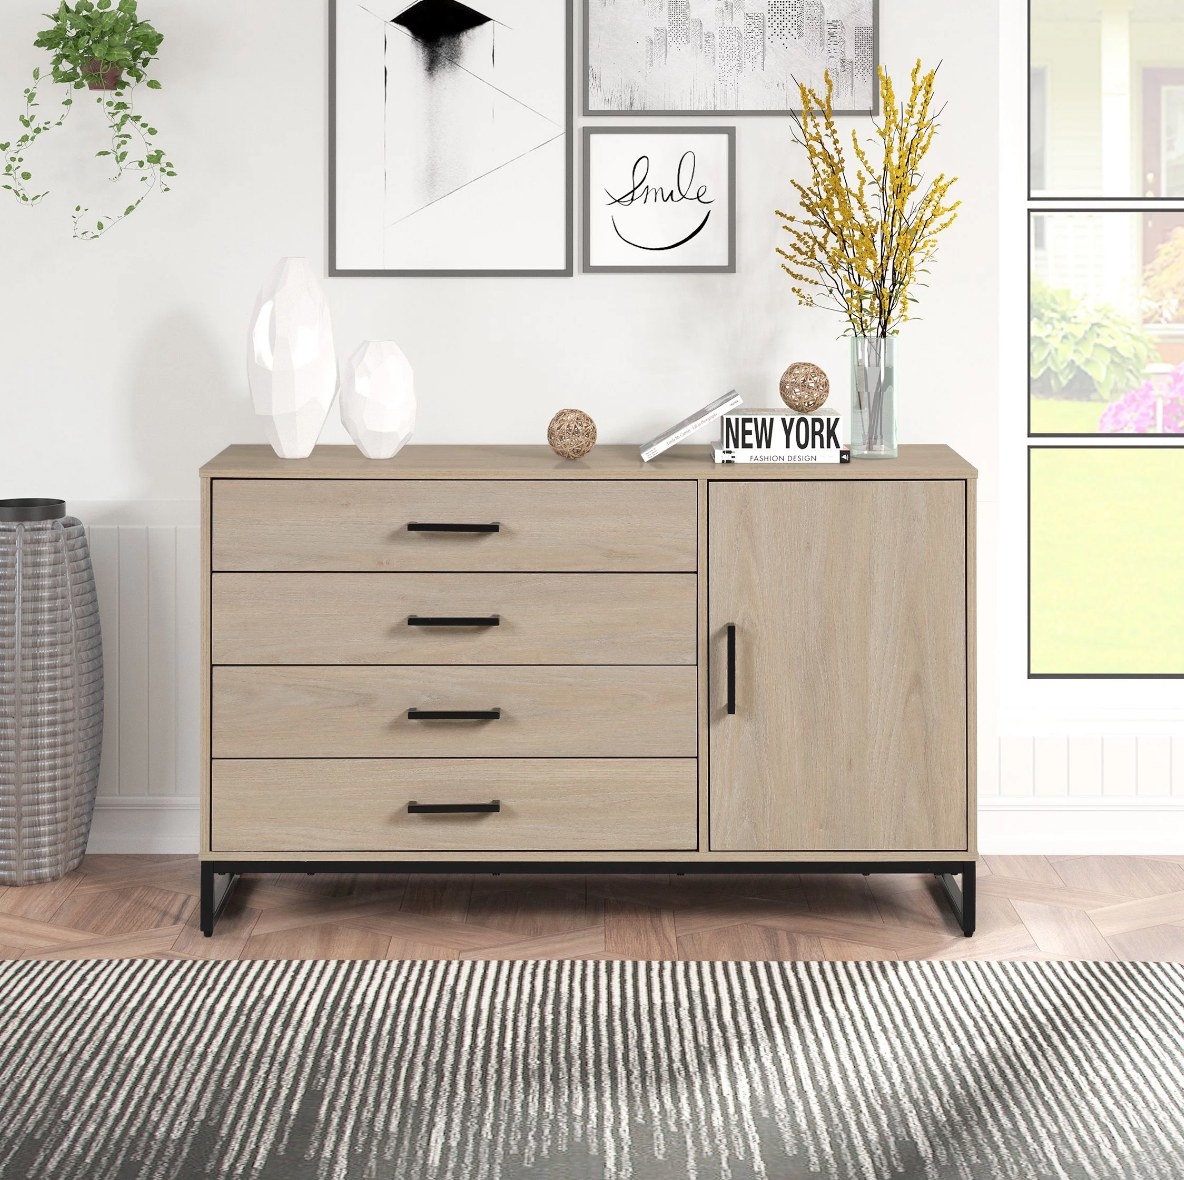 Beige dresser with four drawers on left side, storage cabinet on right side